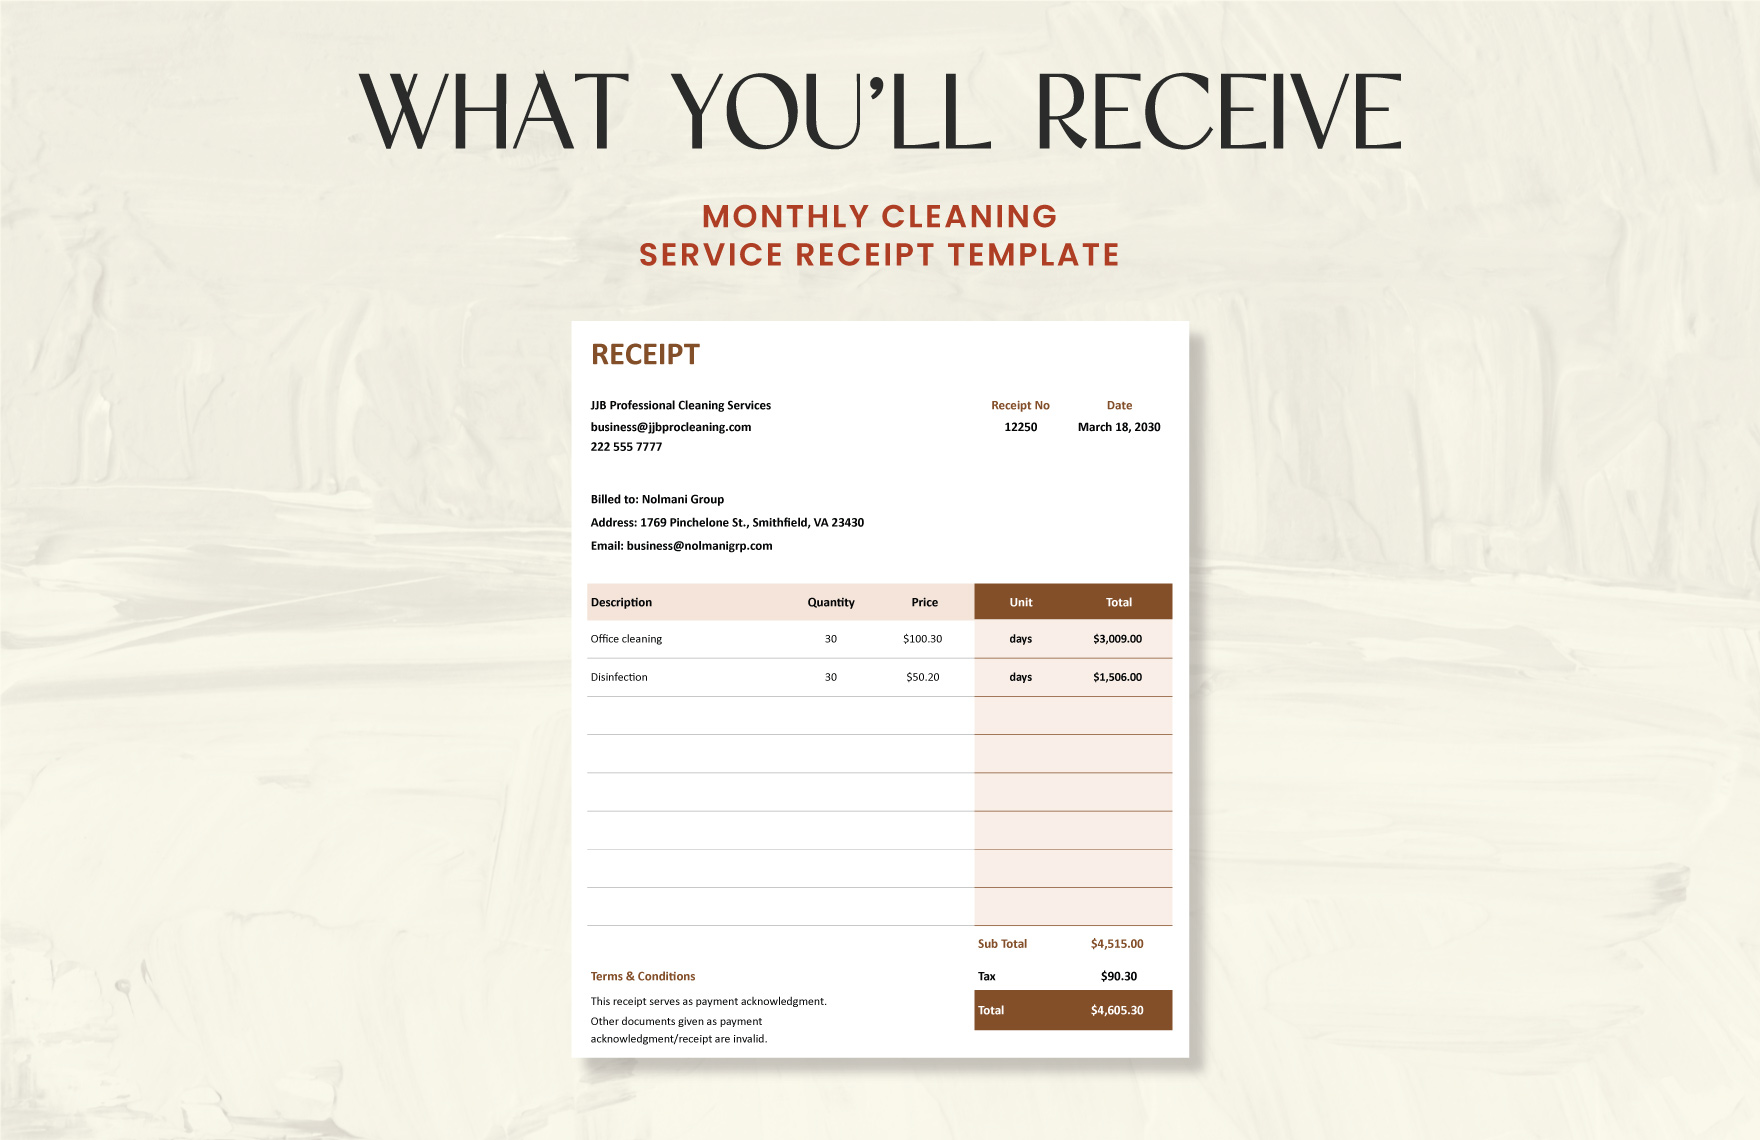 Monthly Cleaning Service Receipt Template